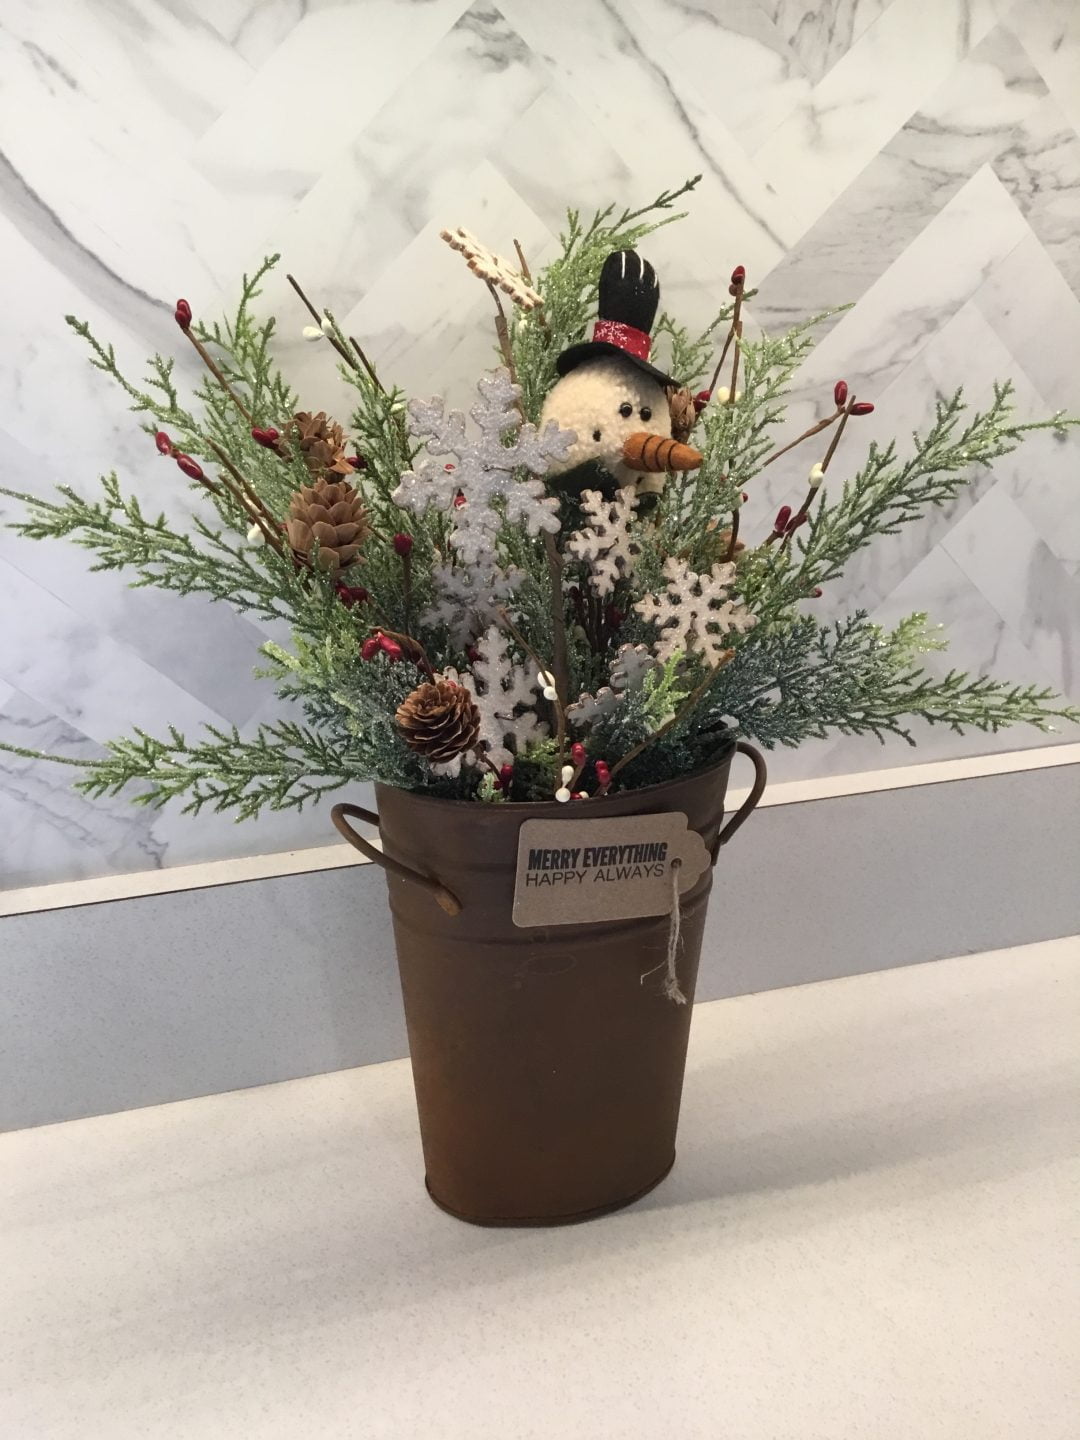 Christmas Rustic Bucket Centerpiece with Snowman